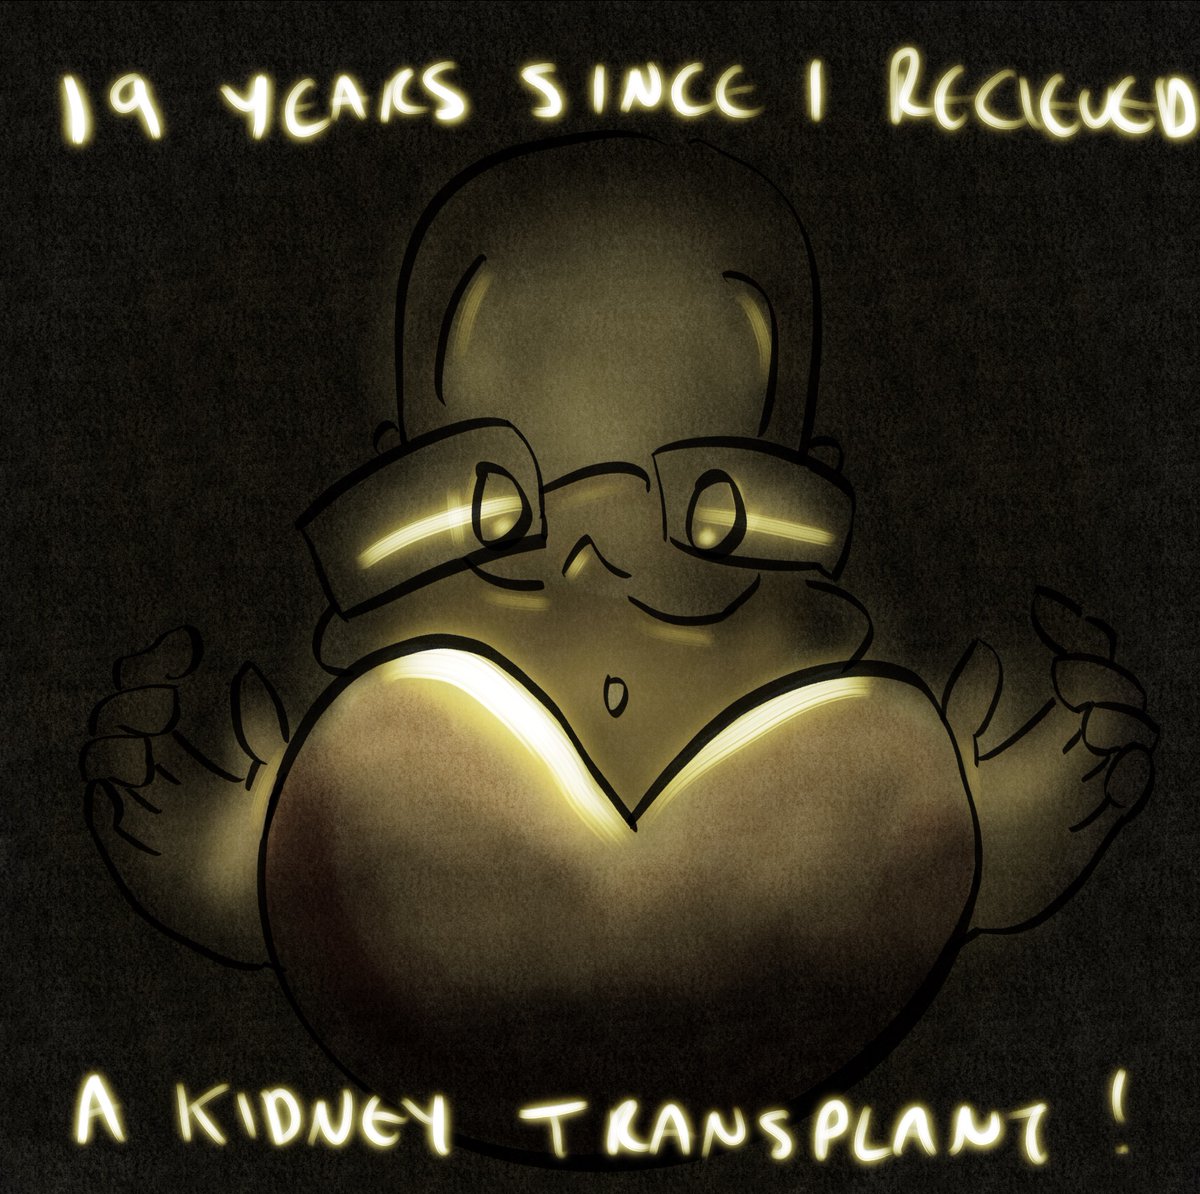 19 years ago today I received a kidney transplant! It’s like precious gold! #doodleaday #draweveryday #procreate #drawing #artdaily #drawings #doodles #doodling #doodle #dailydoodle @kidneycareuk #transplant #kidneytransplant #organdonation #kidney @NHSEngland #NHS #kidneywarrior